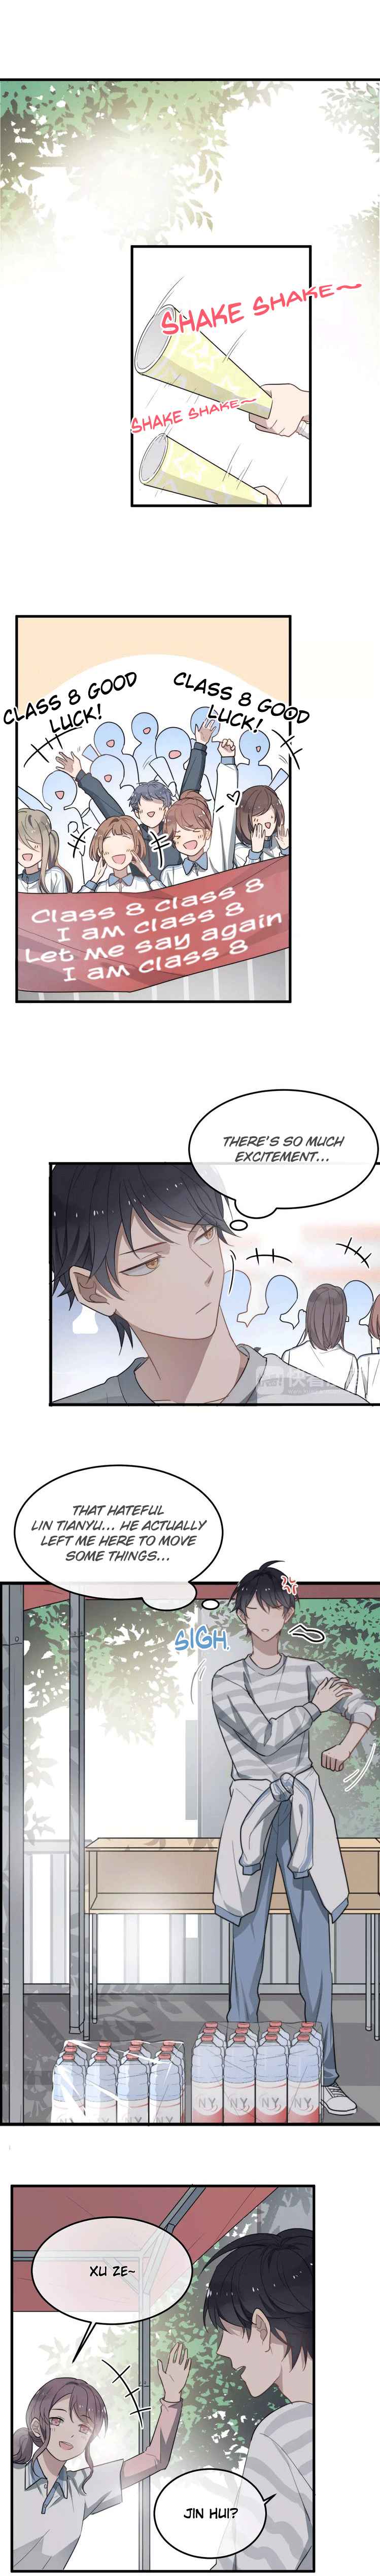 Too Close Ch. 13 You listen really well!